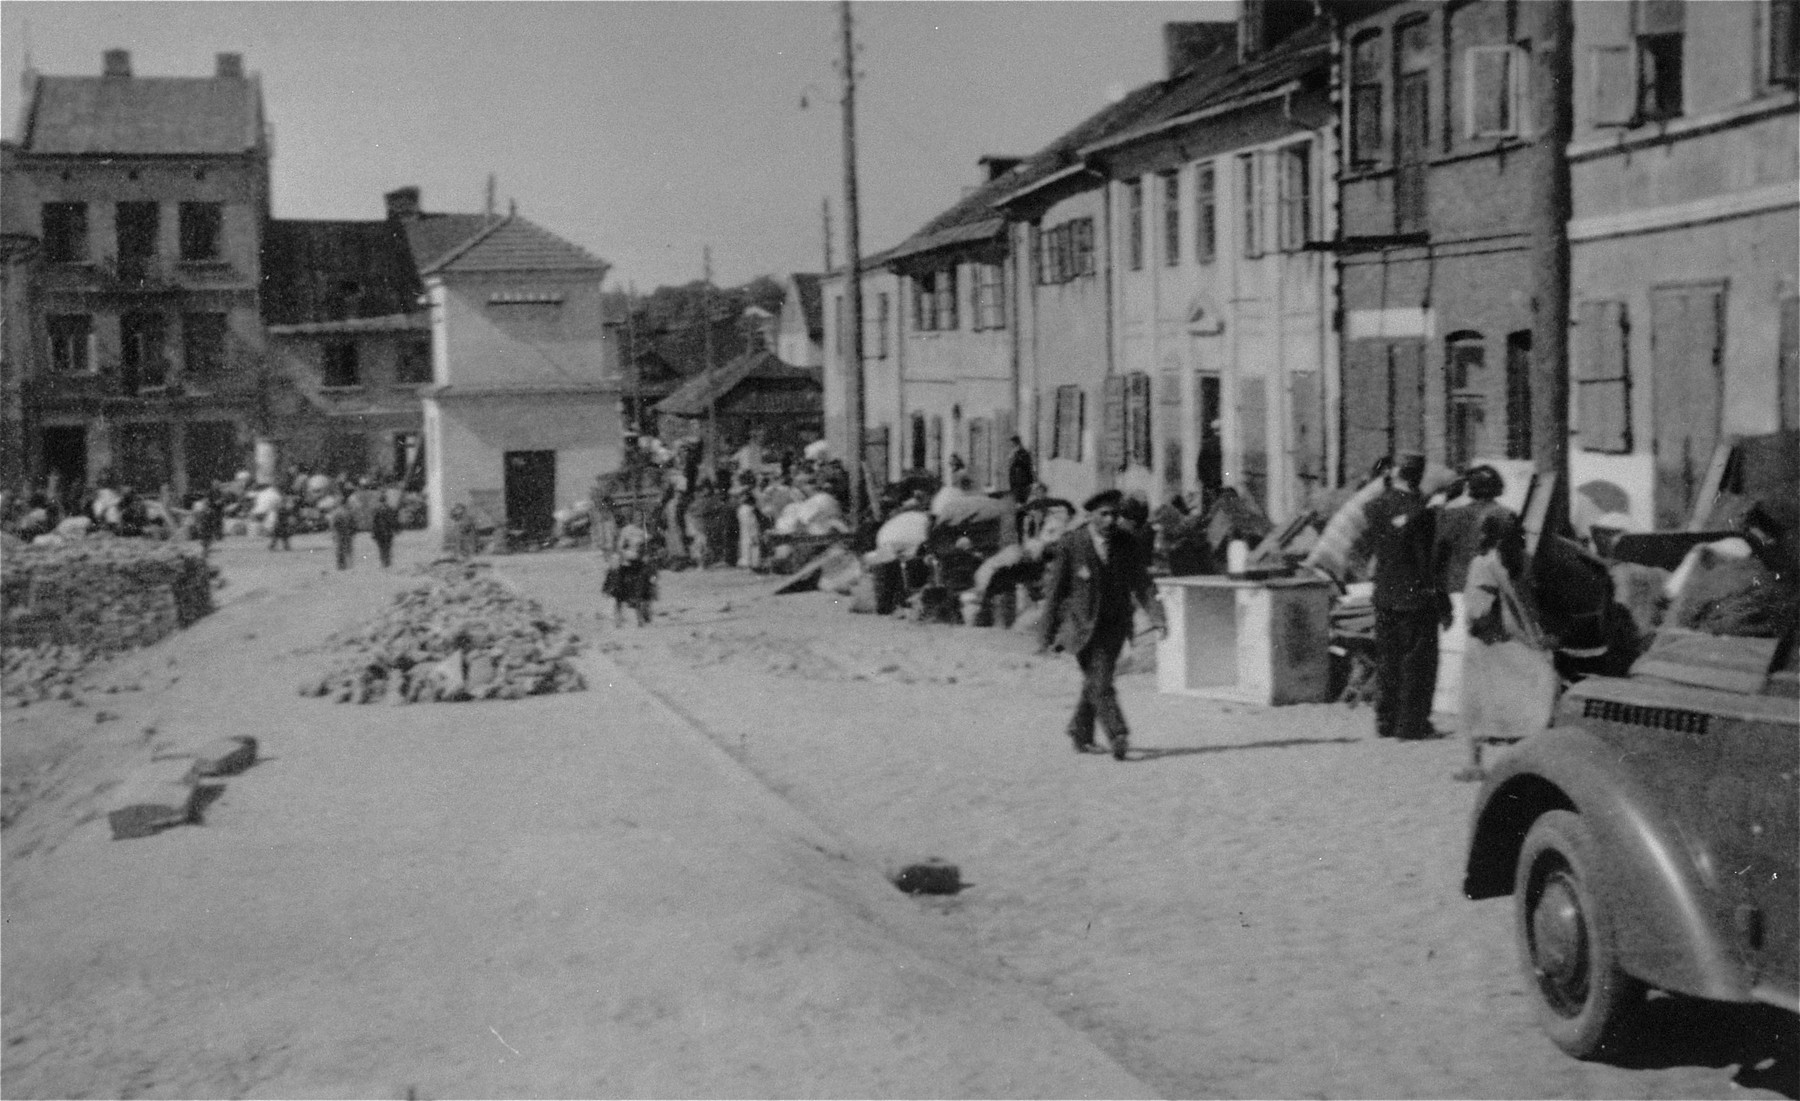 Jews move their belongings to the Kutno ghetto.

The original German caption reads: "Jews out!"